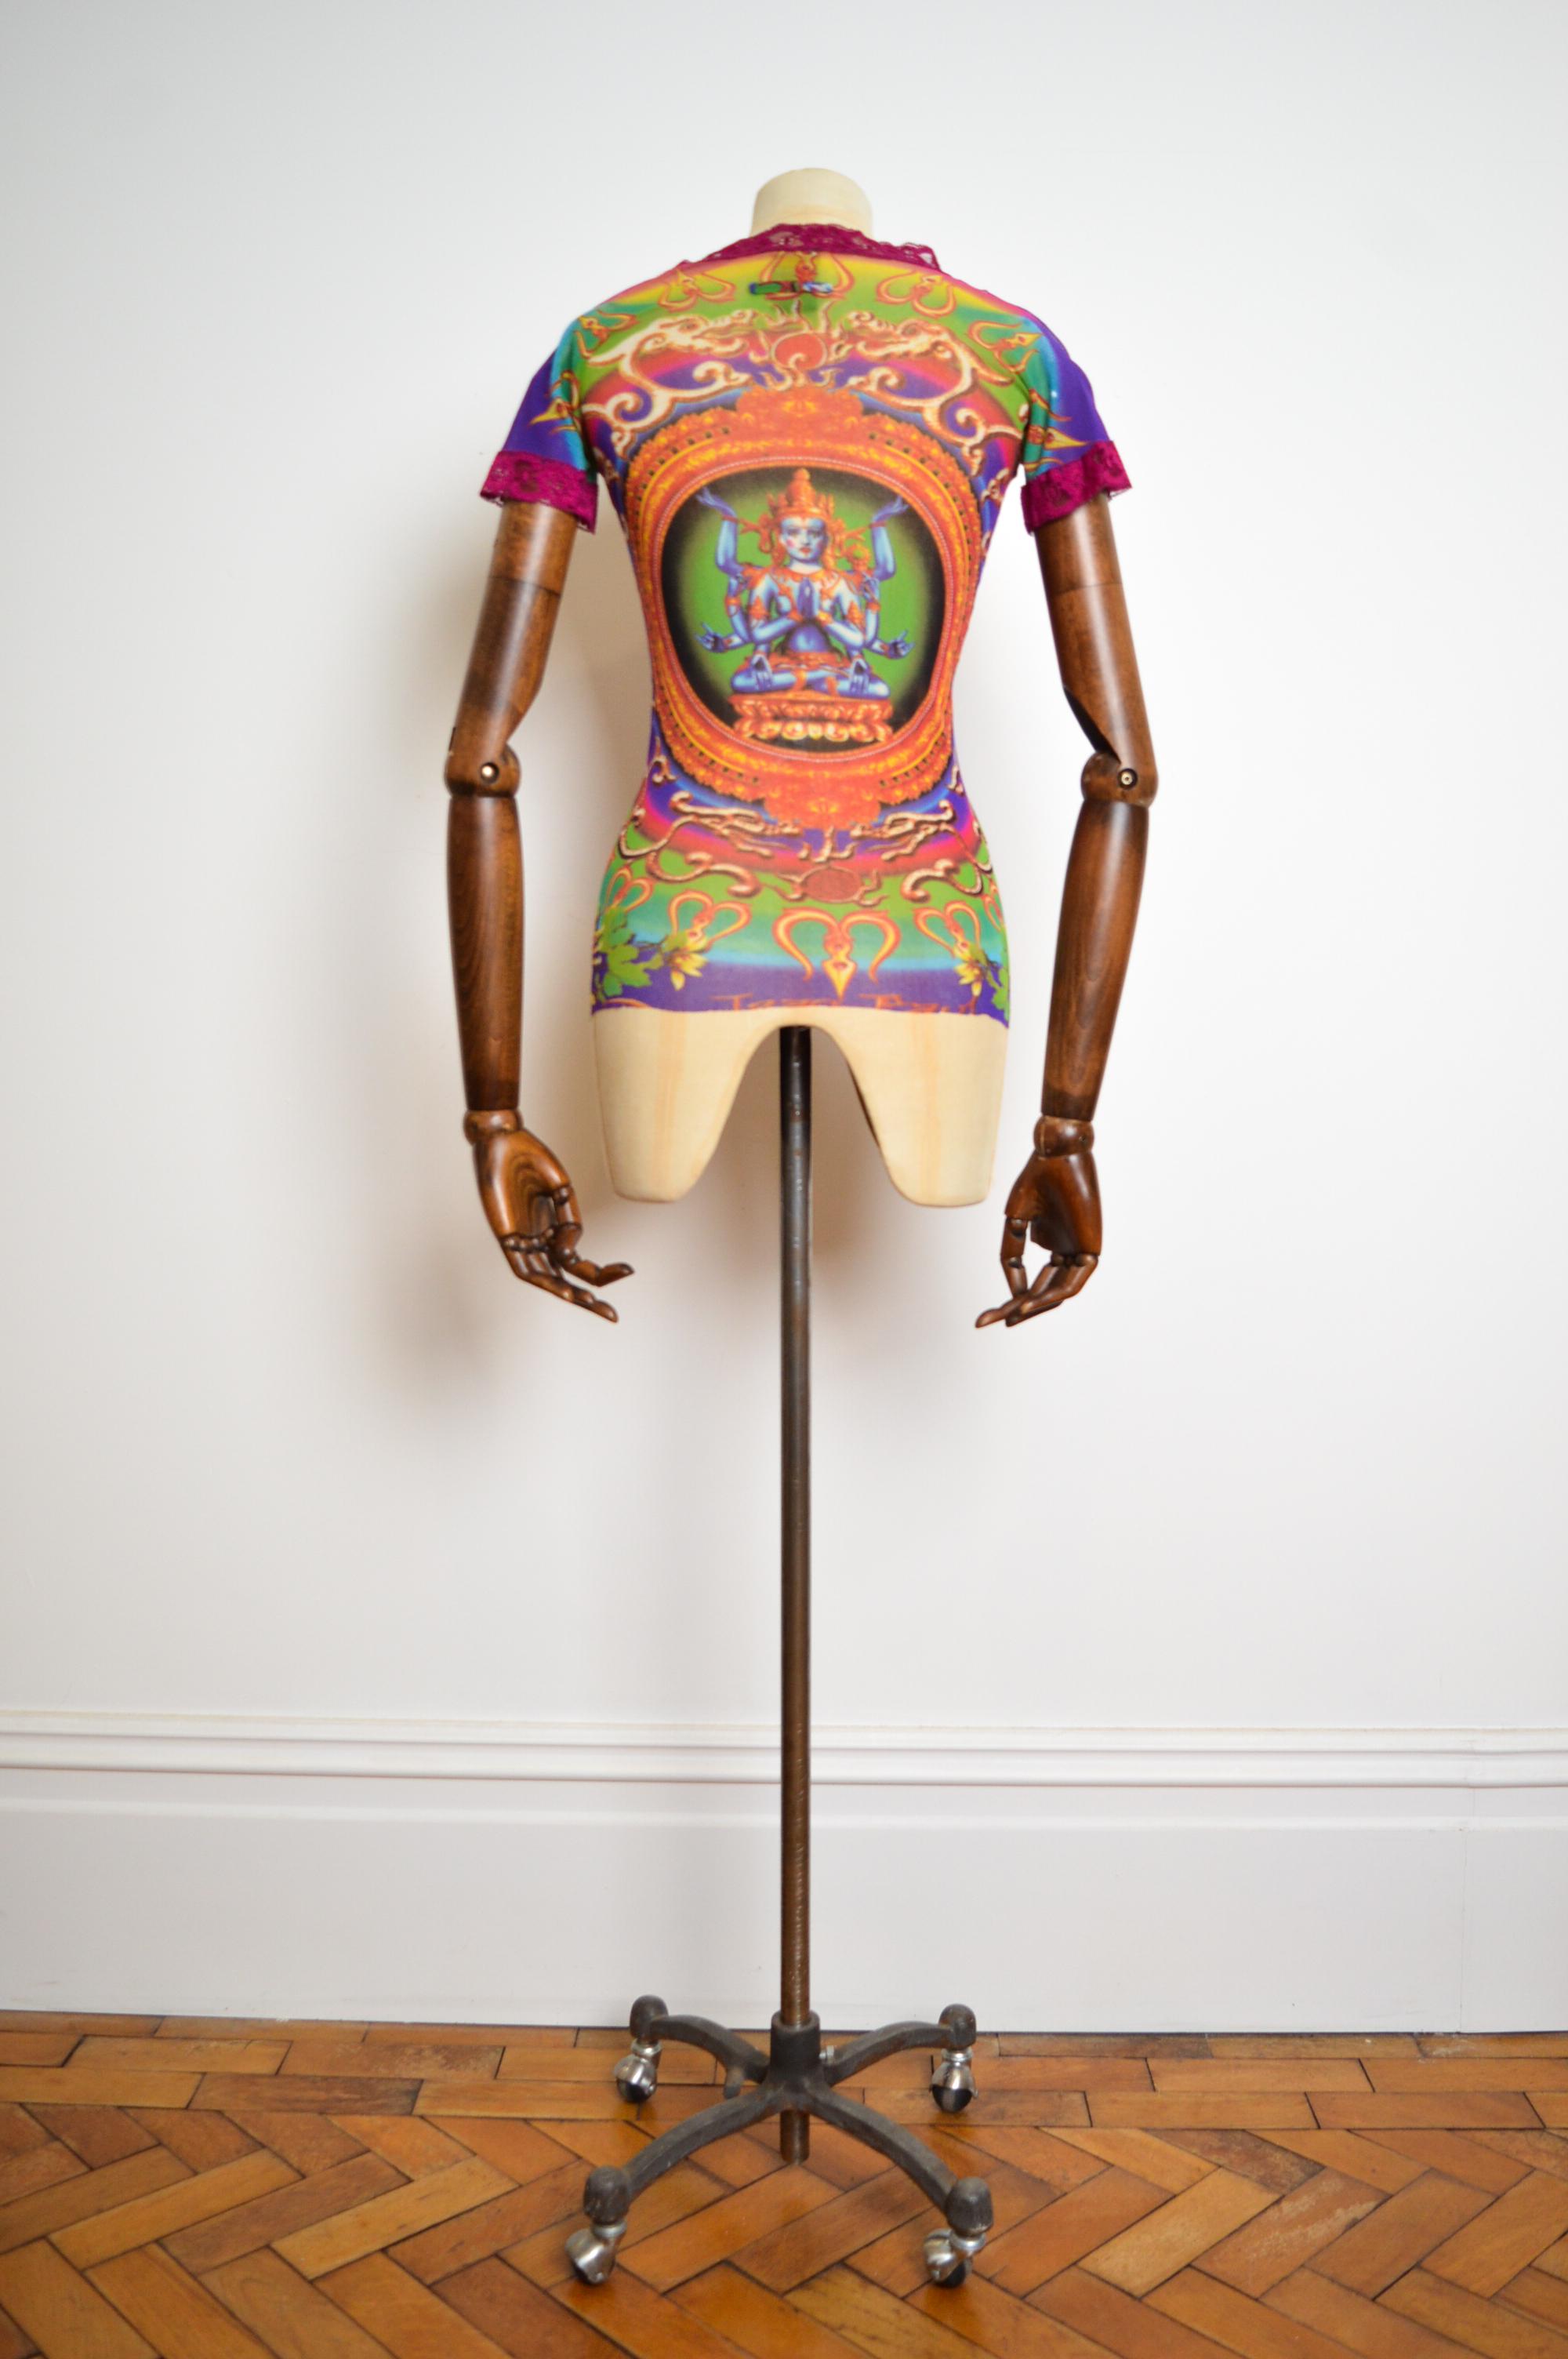 1993 Jean Paul Gaultier Blue Goddess Hindu Diety Colourful Mesh Top - Baby Tee For Sale 7